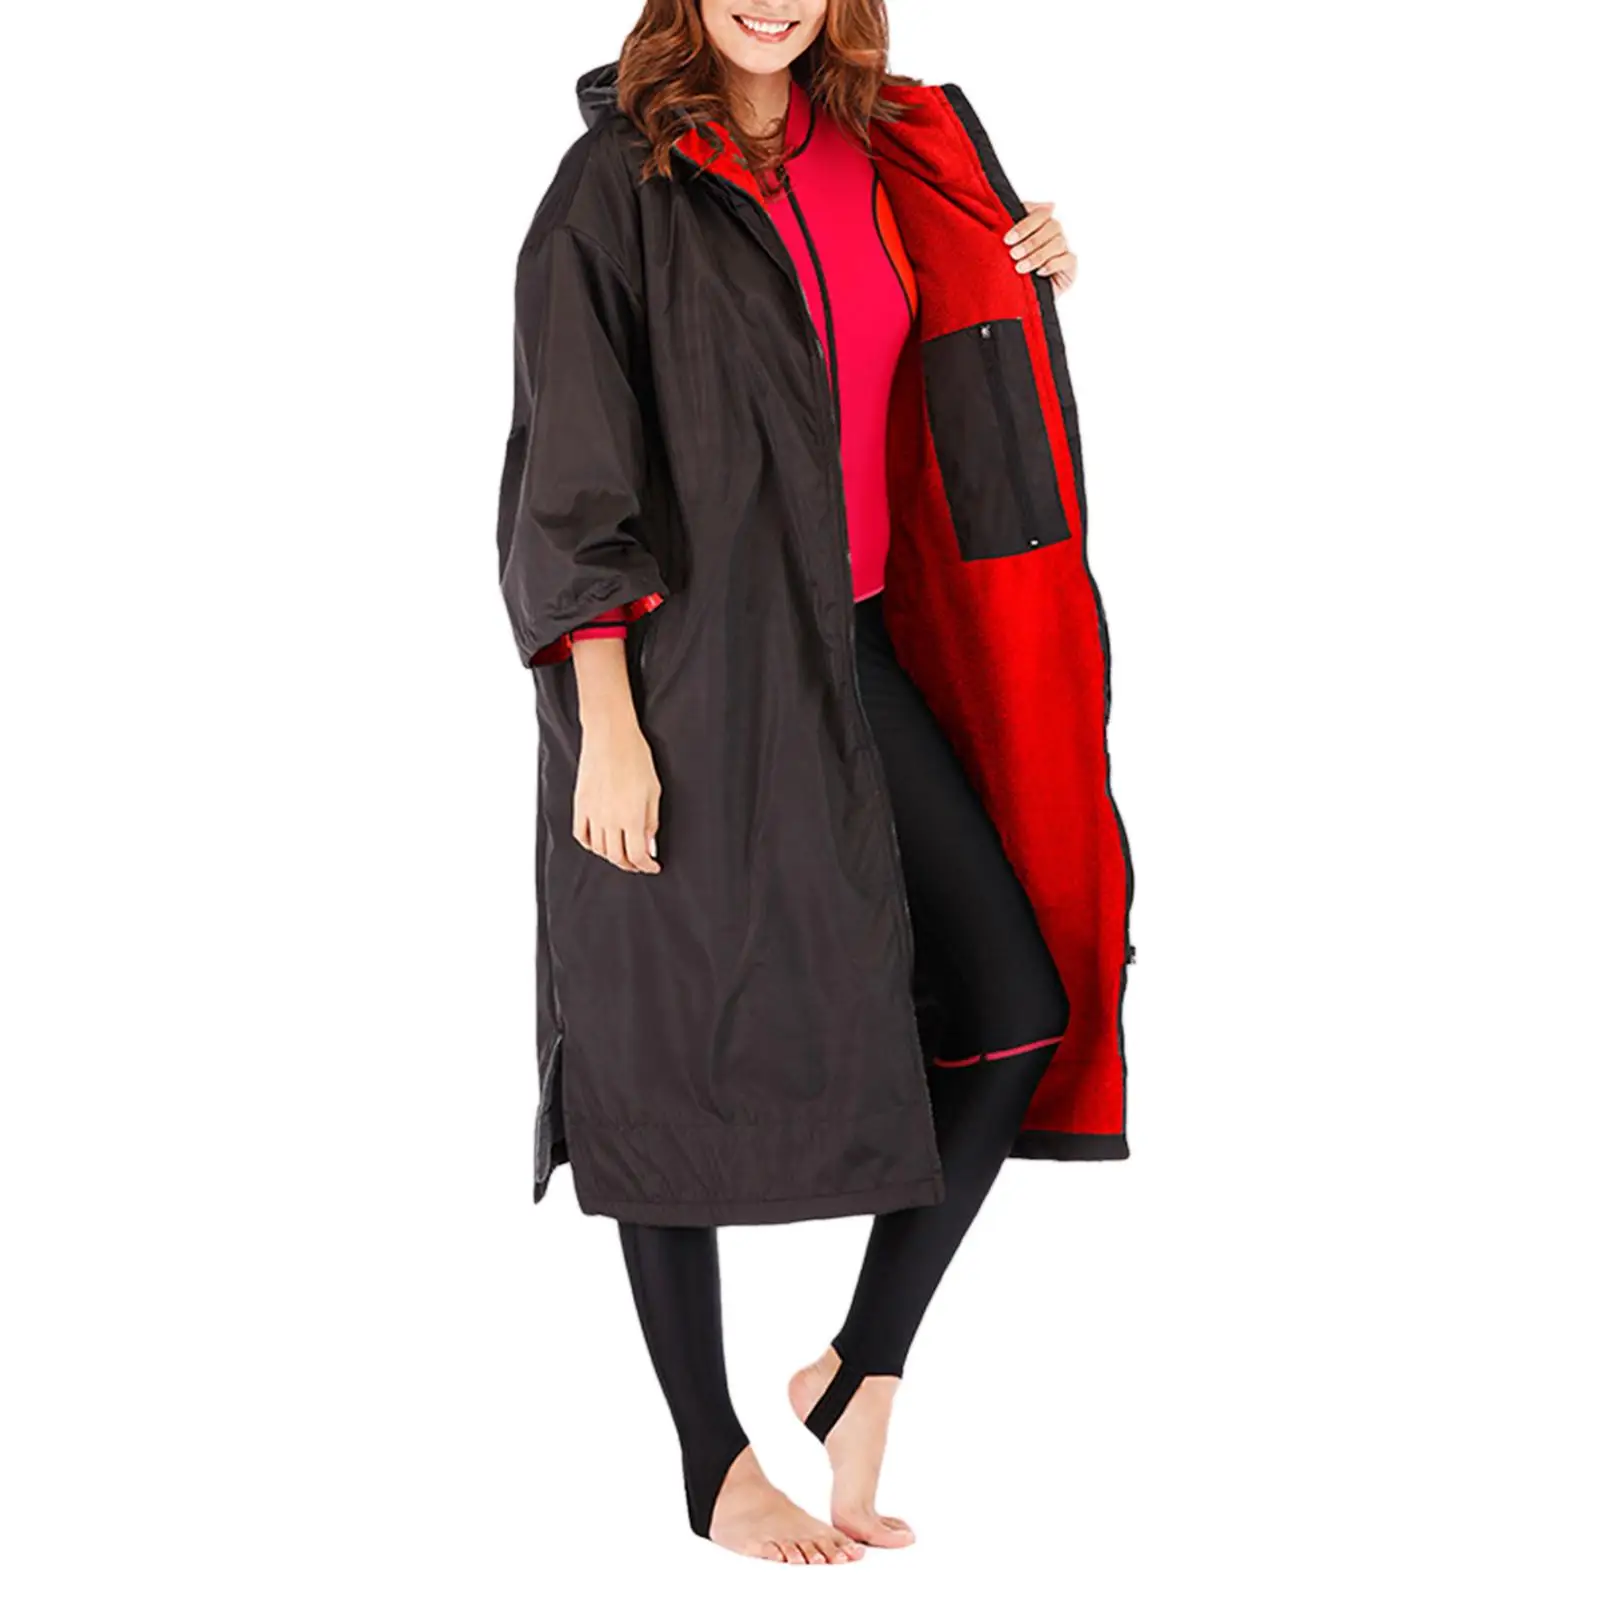 Waterproof Surf Changing Robe Outdoor Coat Fleece Lined Jacket Keeping Warm Dry Oversized Poncho Coat for Swimming Surfing Beach